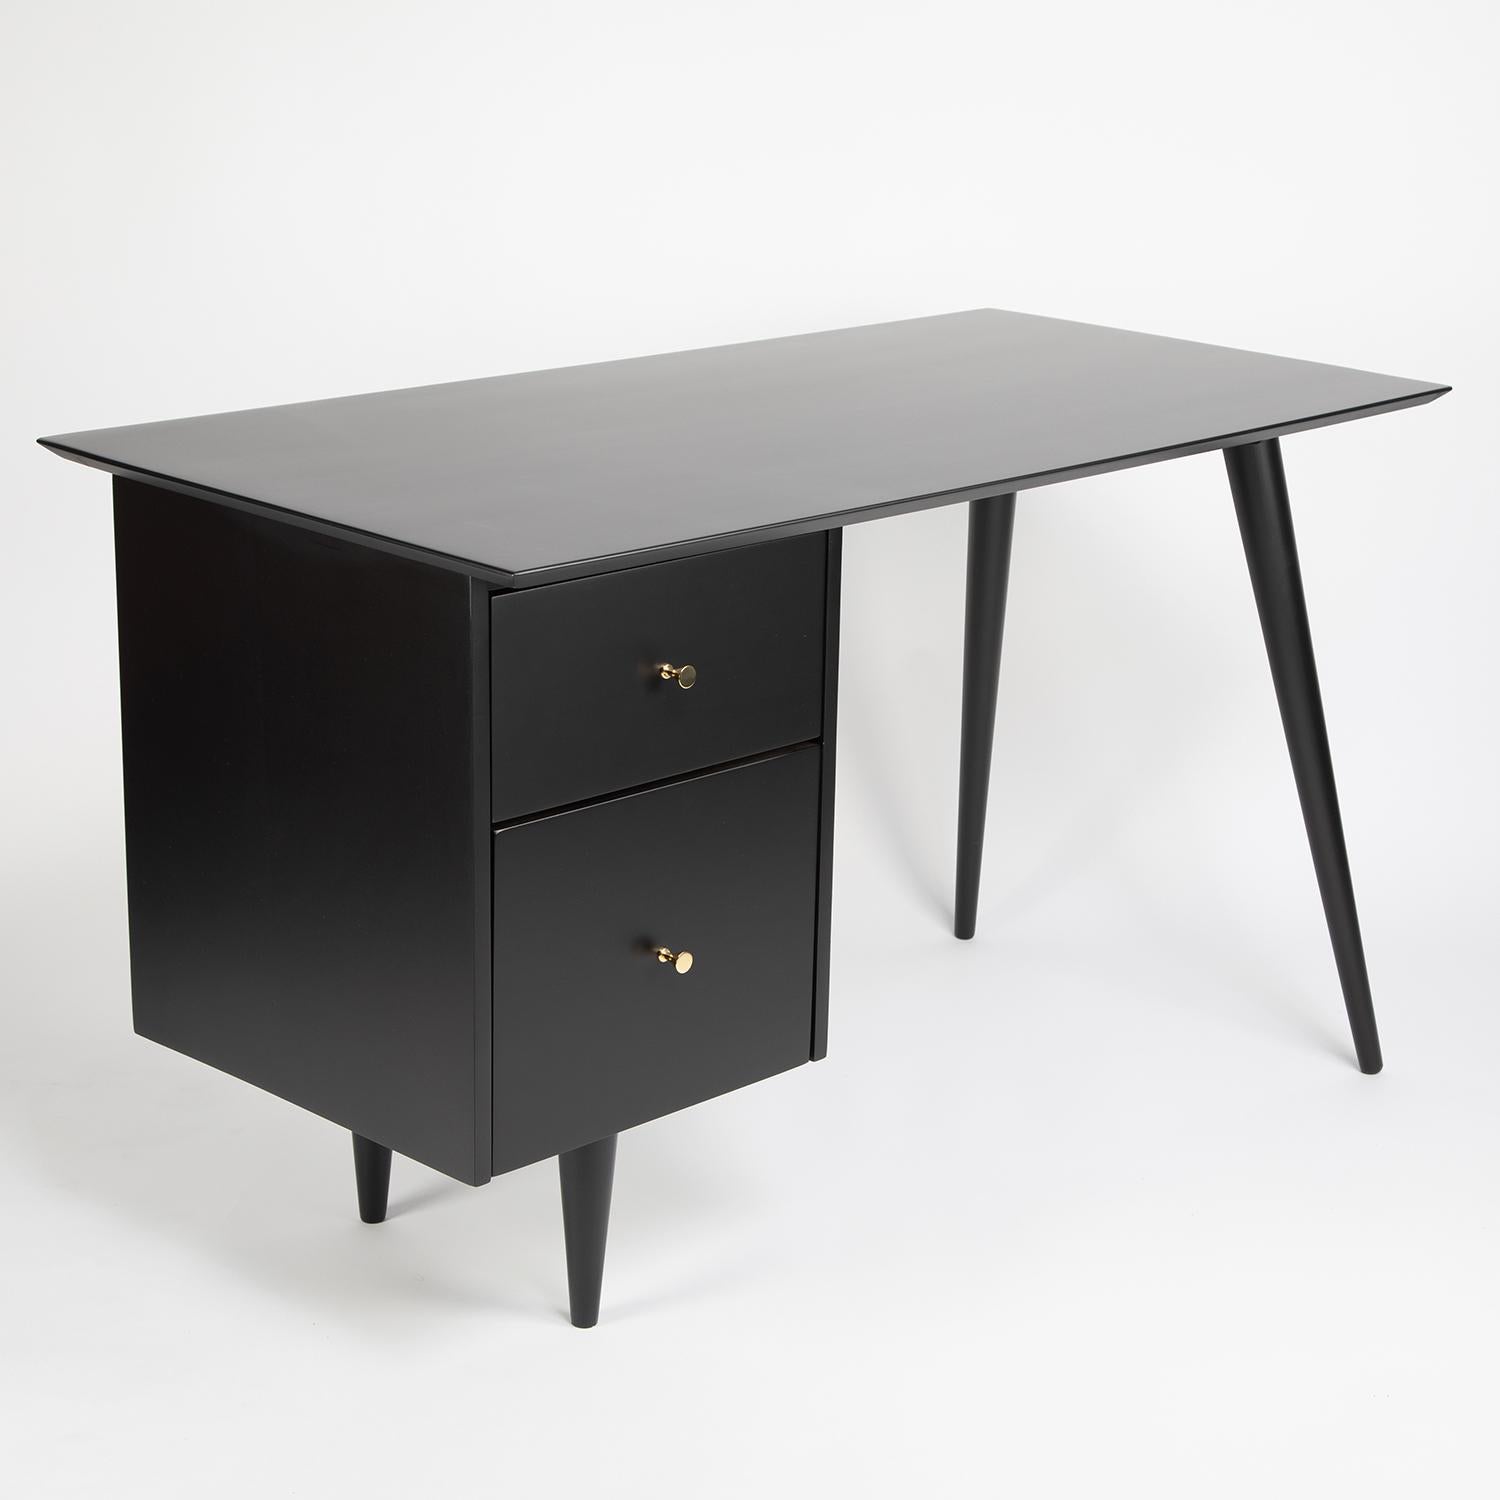 Stylish desk in ebonized maple with tapering legs and brass pulls by Paul McCobb, for the Planner Group collection for Winchendon Furniture, circa 1950s (signed).